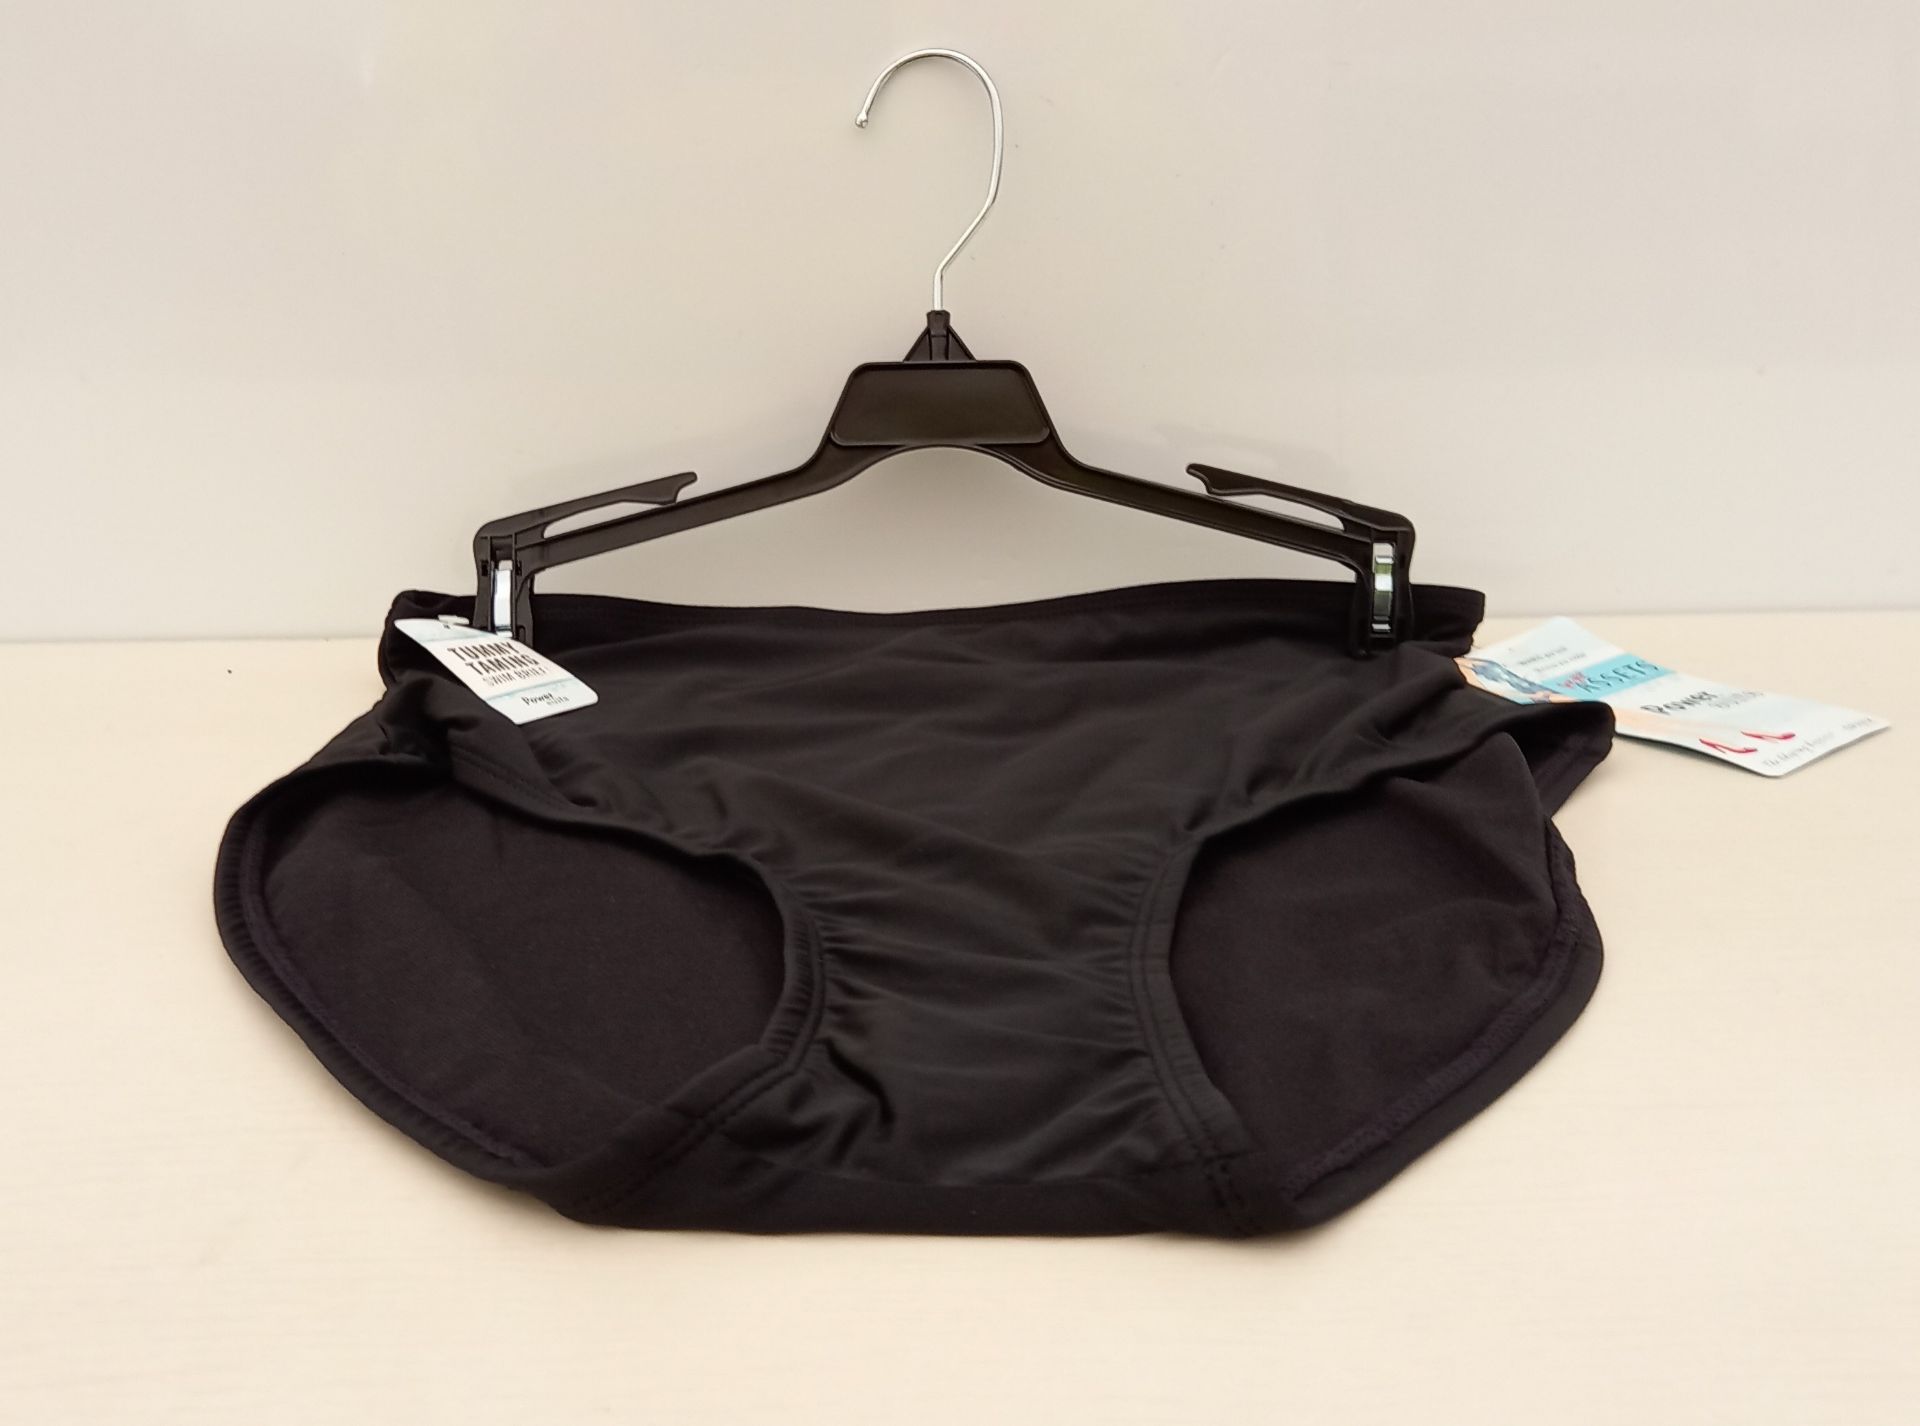 20 X BRAND NEW SPANX FULL COVERAGE BOTTOMS IN JET BLACK SIZE XL RRP $29.99 (TOTAL RRP $599.80)